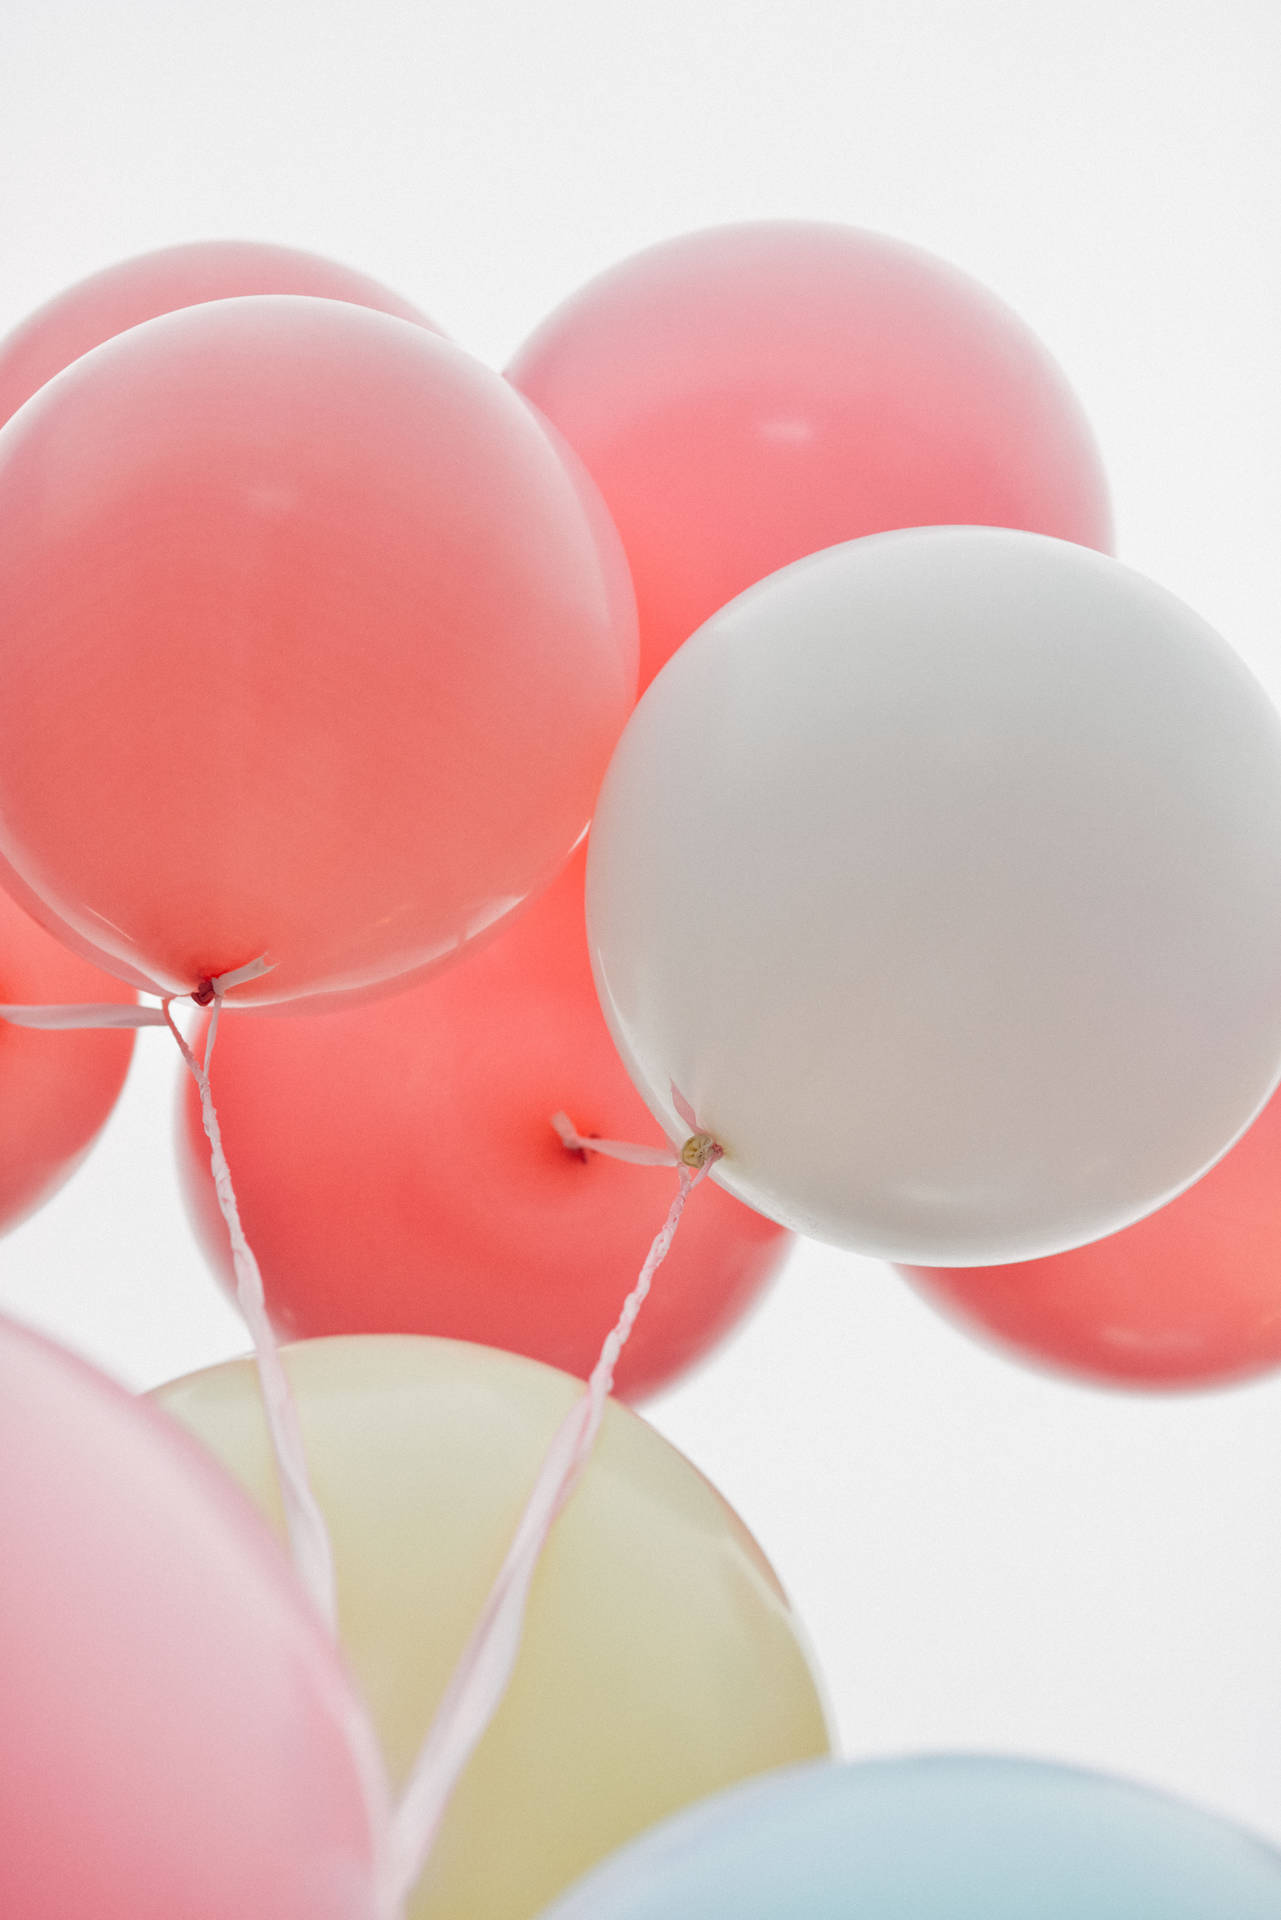 Pastel Balloons At White Background Background